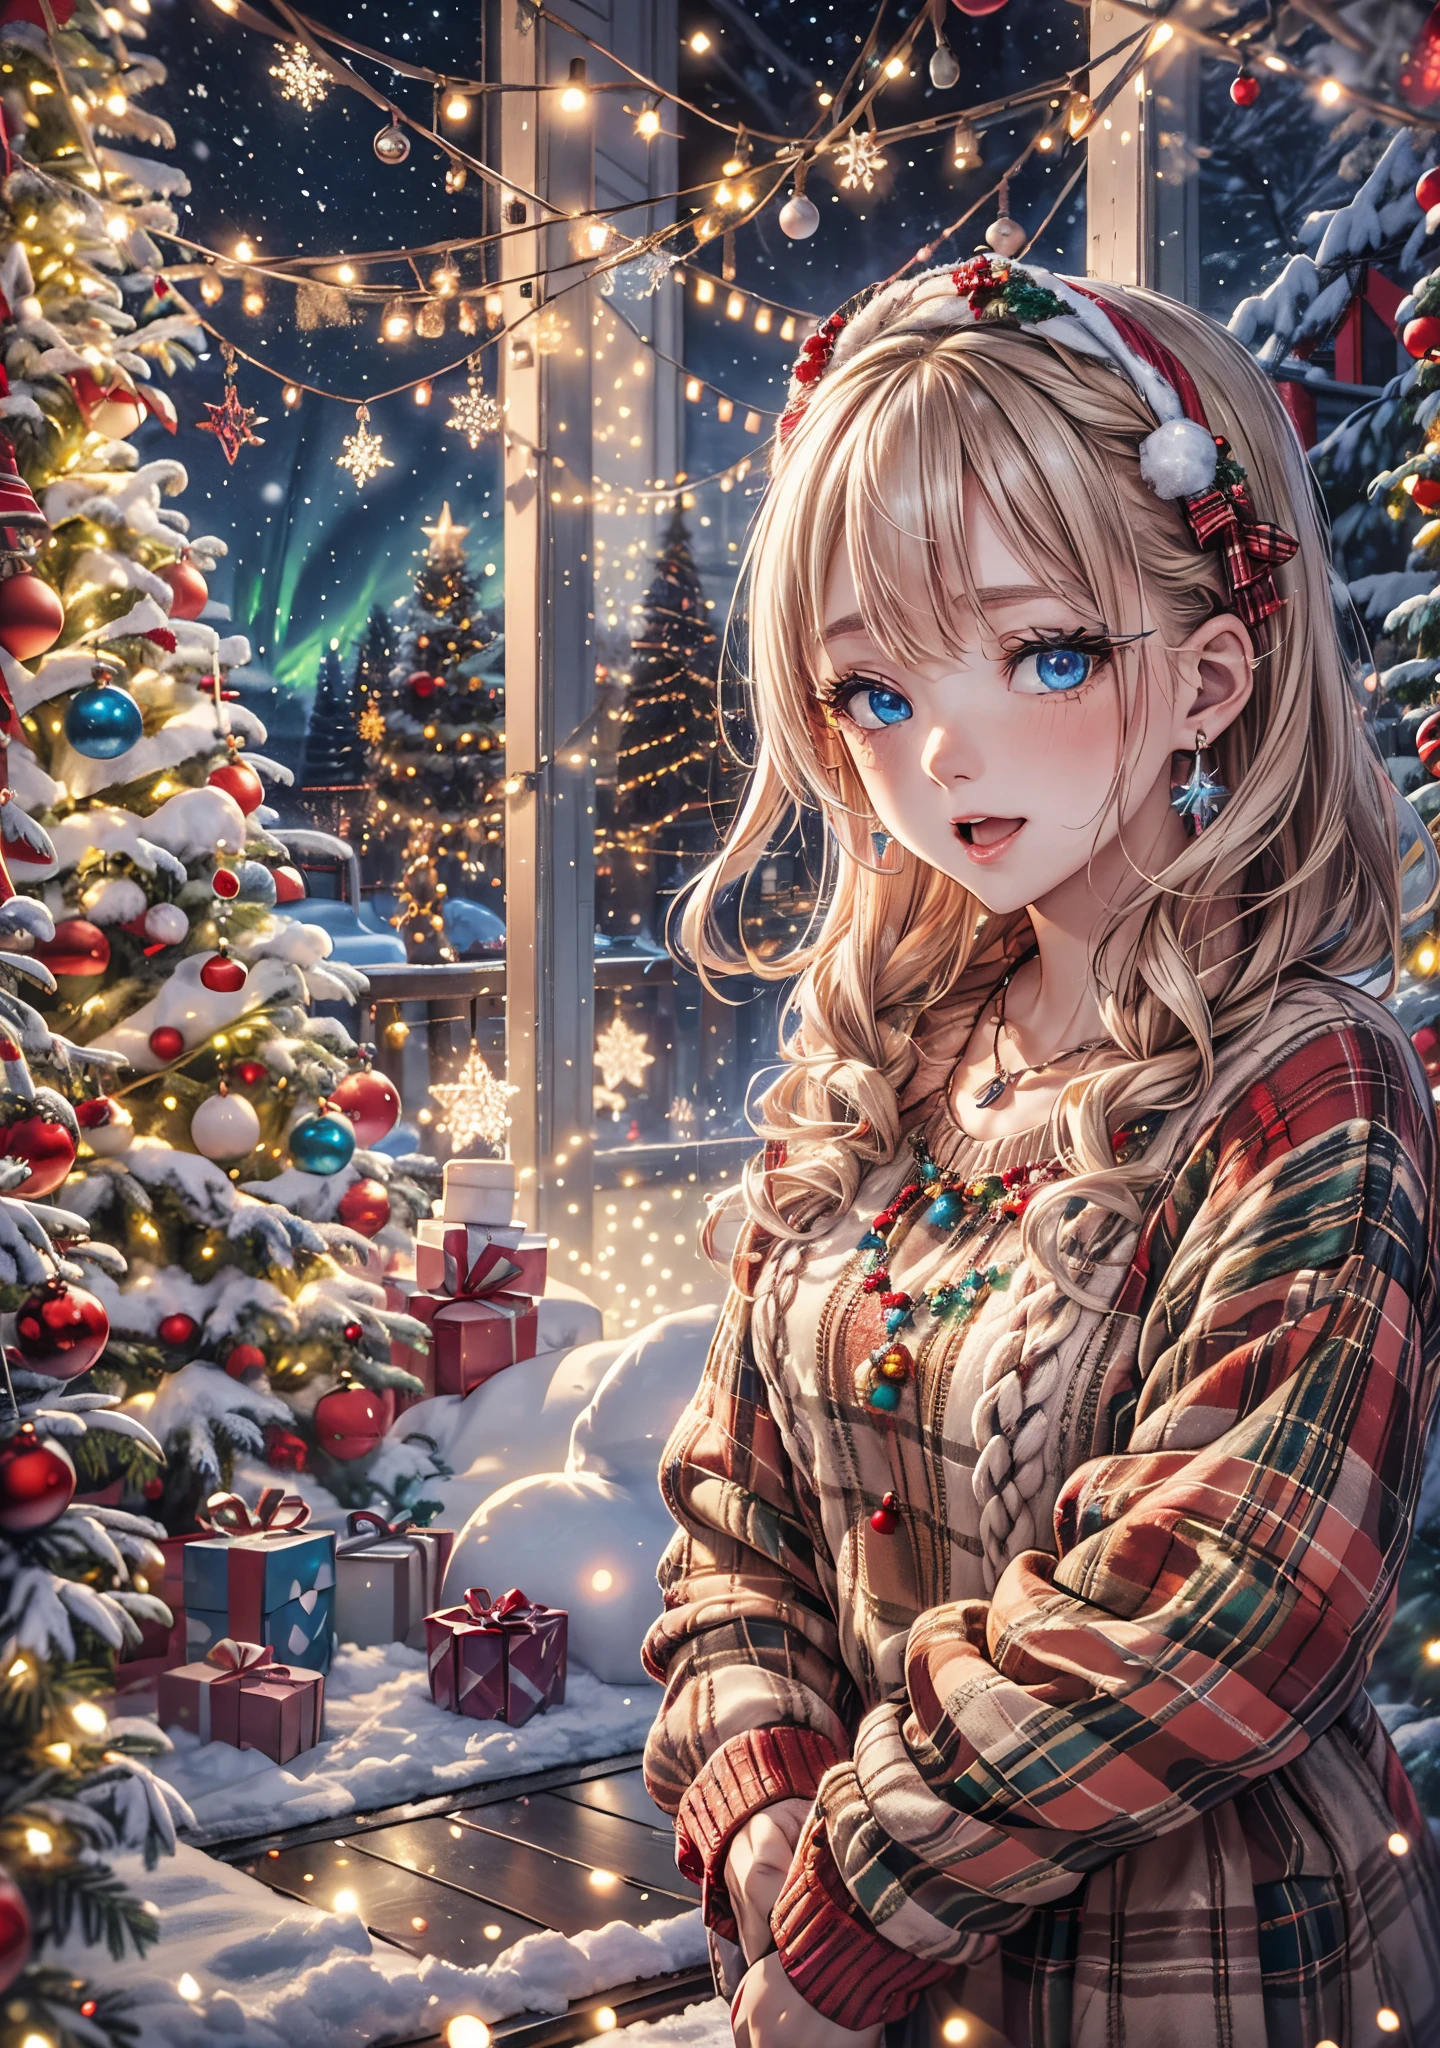 absurderes, ultra-detailliert,bright colour, Short hair,Blonde hair with fluffy short twintails:1.2) Shiny hair,(red and white plaid sweater dress:1.5),(Open mouth and laugh 1. 3),(Close one eye and feel shy:1.3),(Christmas tree:1.3),(Christmas Decorations:1.3),(colorful led lights on the wall:1.5),Delicate beautiful face, red blush、(Deep Blue Eyes:1.5), White skin, hair clips, earrings, a necklace,Heavy snow outside the window,You can also see the starry sky and the aurora borealis........